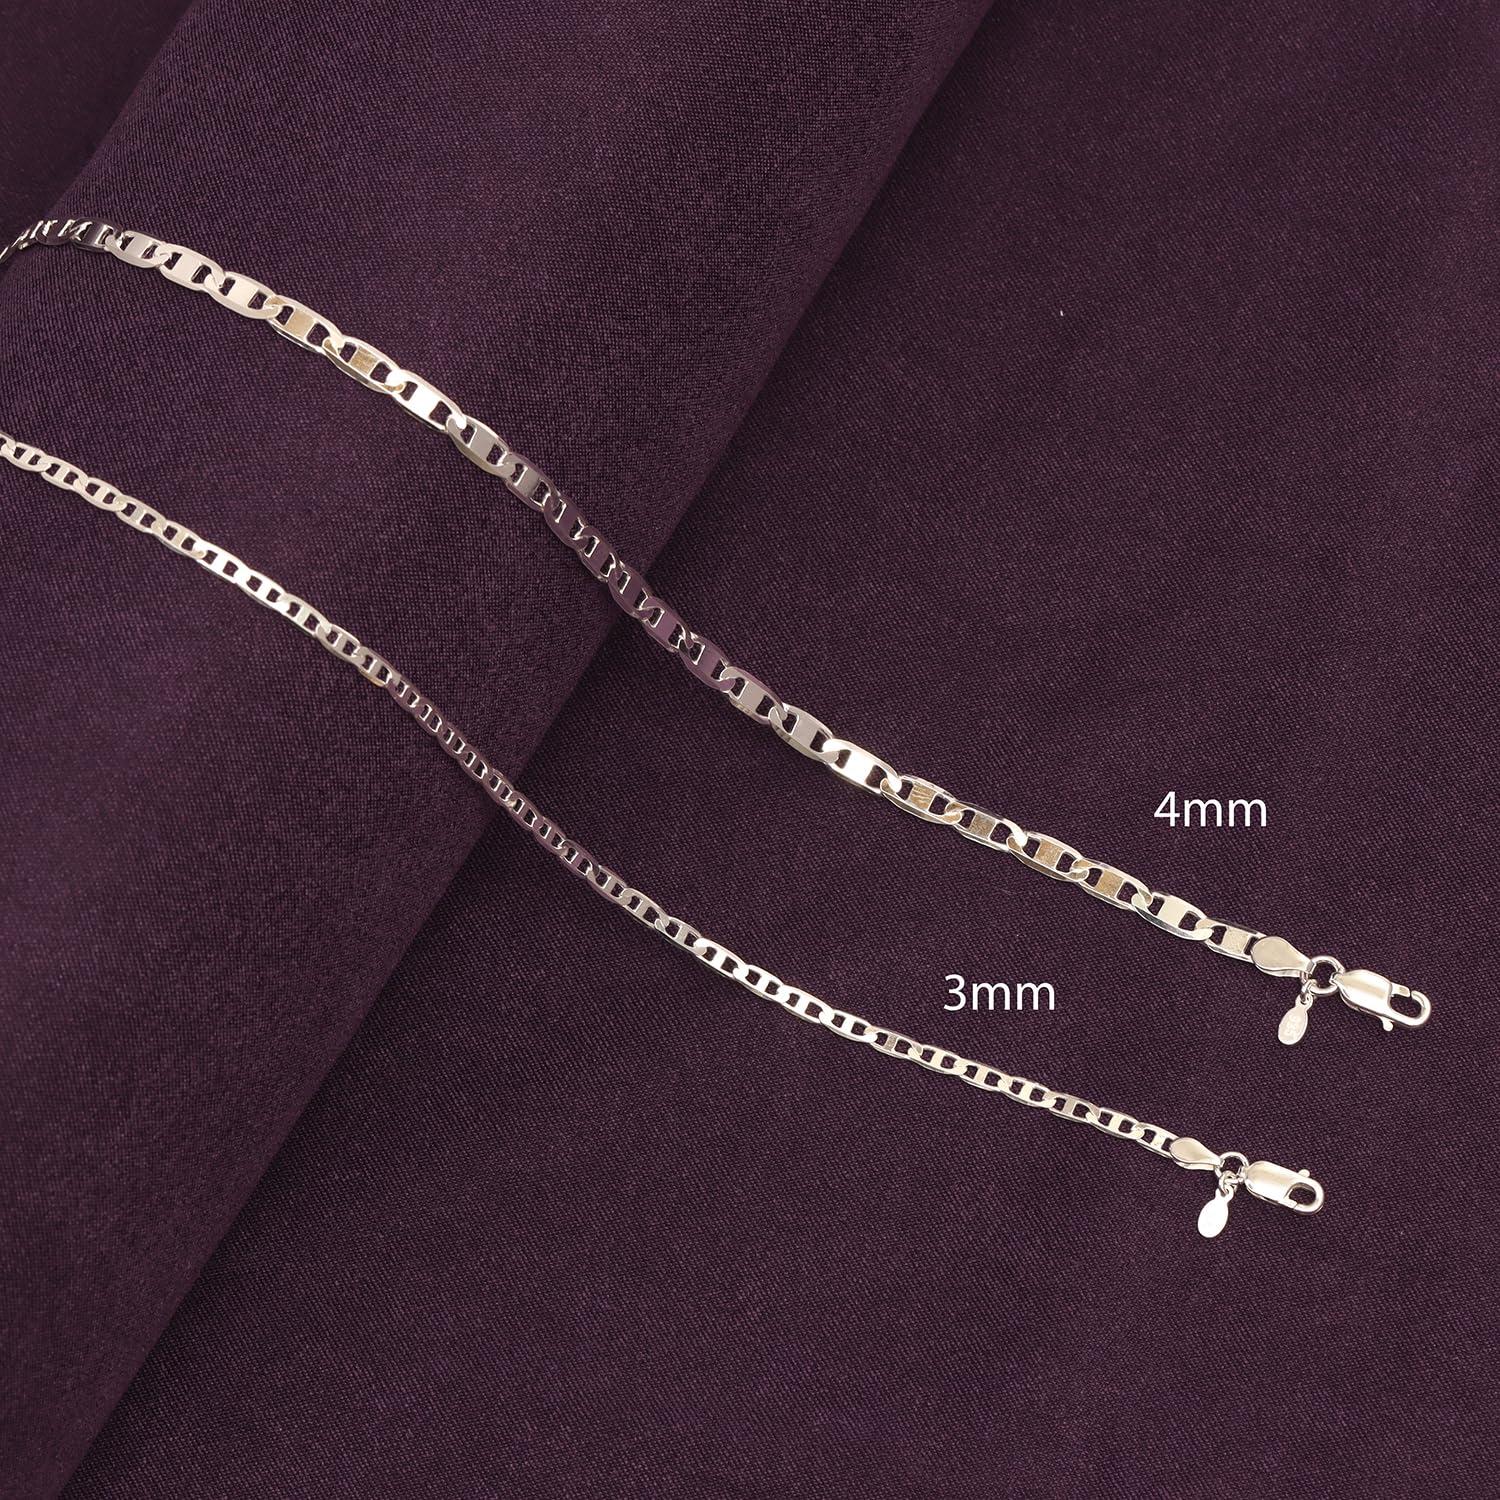 925 Sterling Silver Italian 4 MM Diamond-Cut Solid Flat Mariner Link Chain Necklace for Men and Women